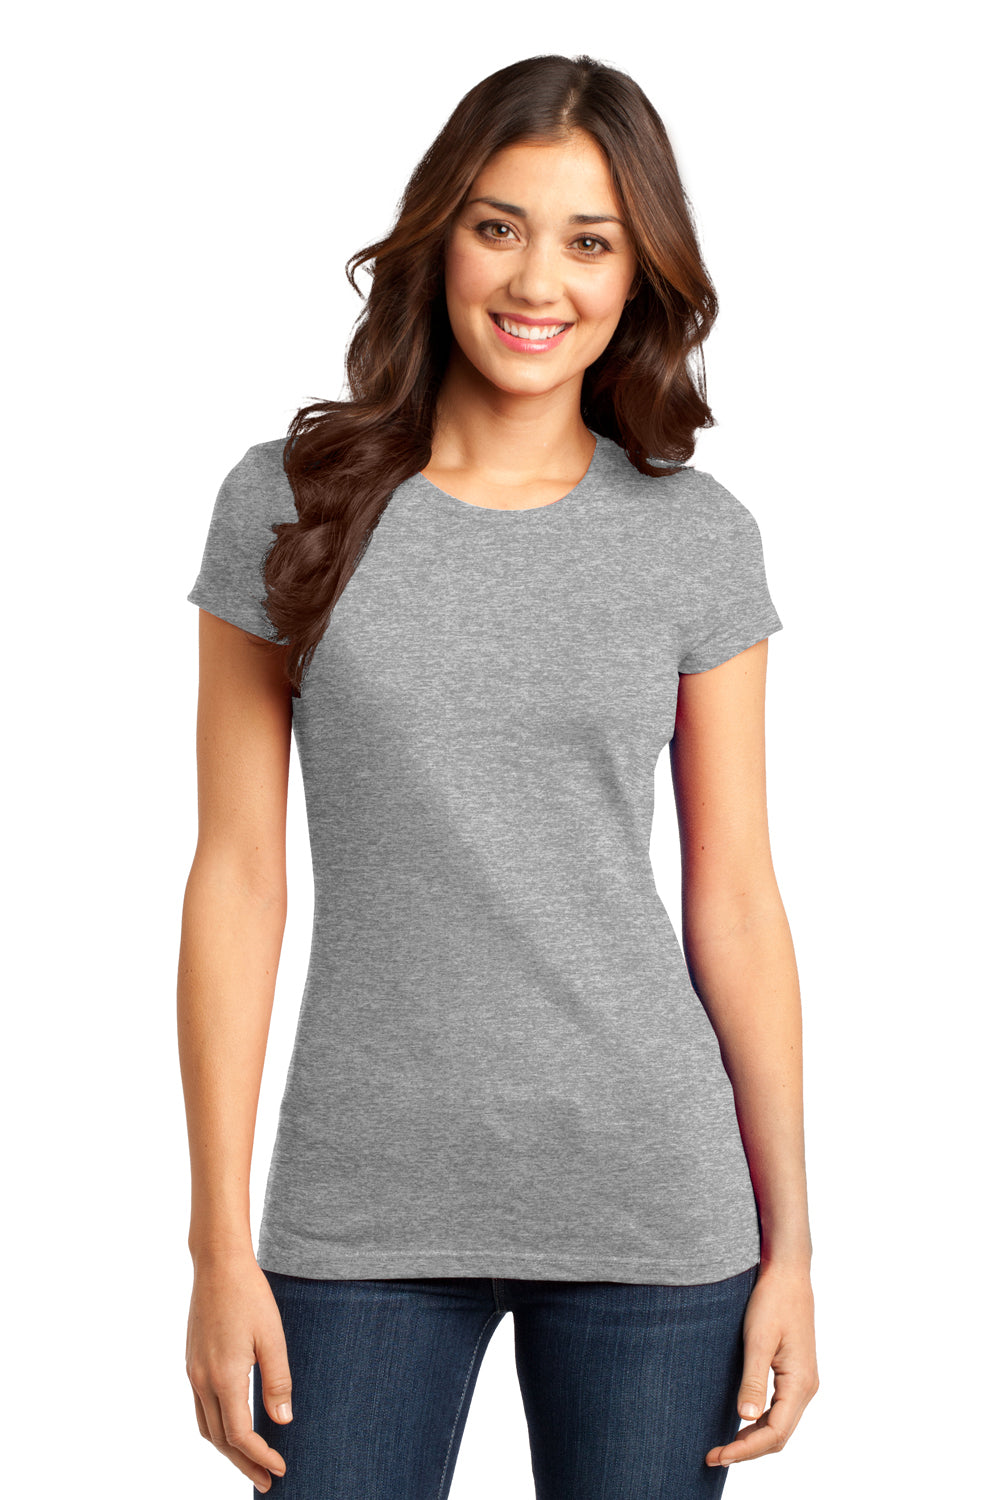 District DT6001 Womens Very Important Short Sleeve Crewneck T-Shirt Heather Light Grey Front